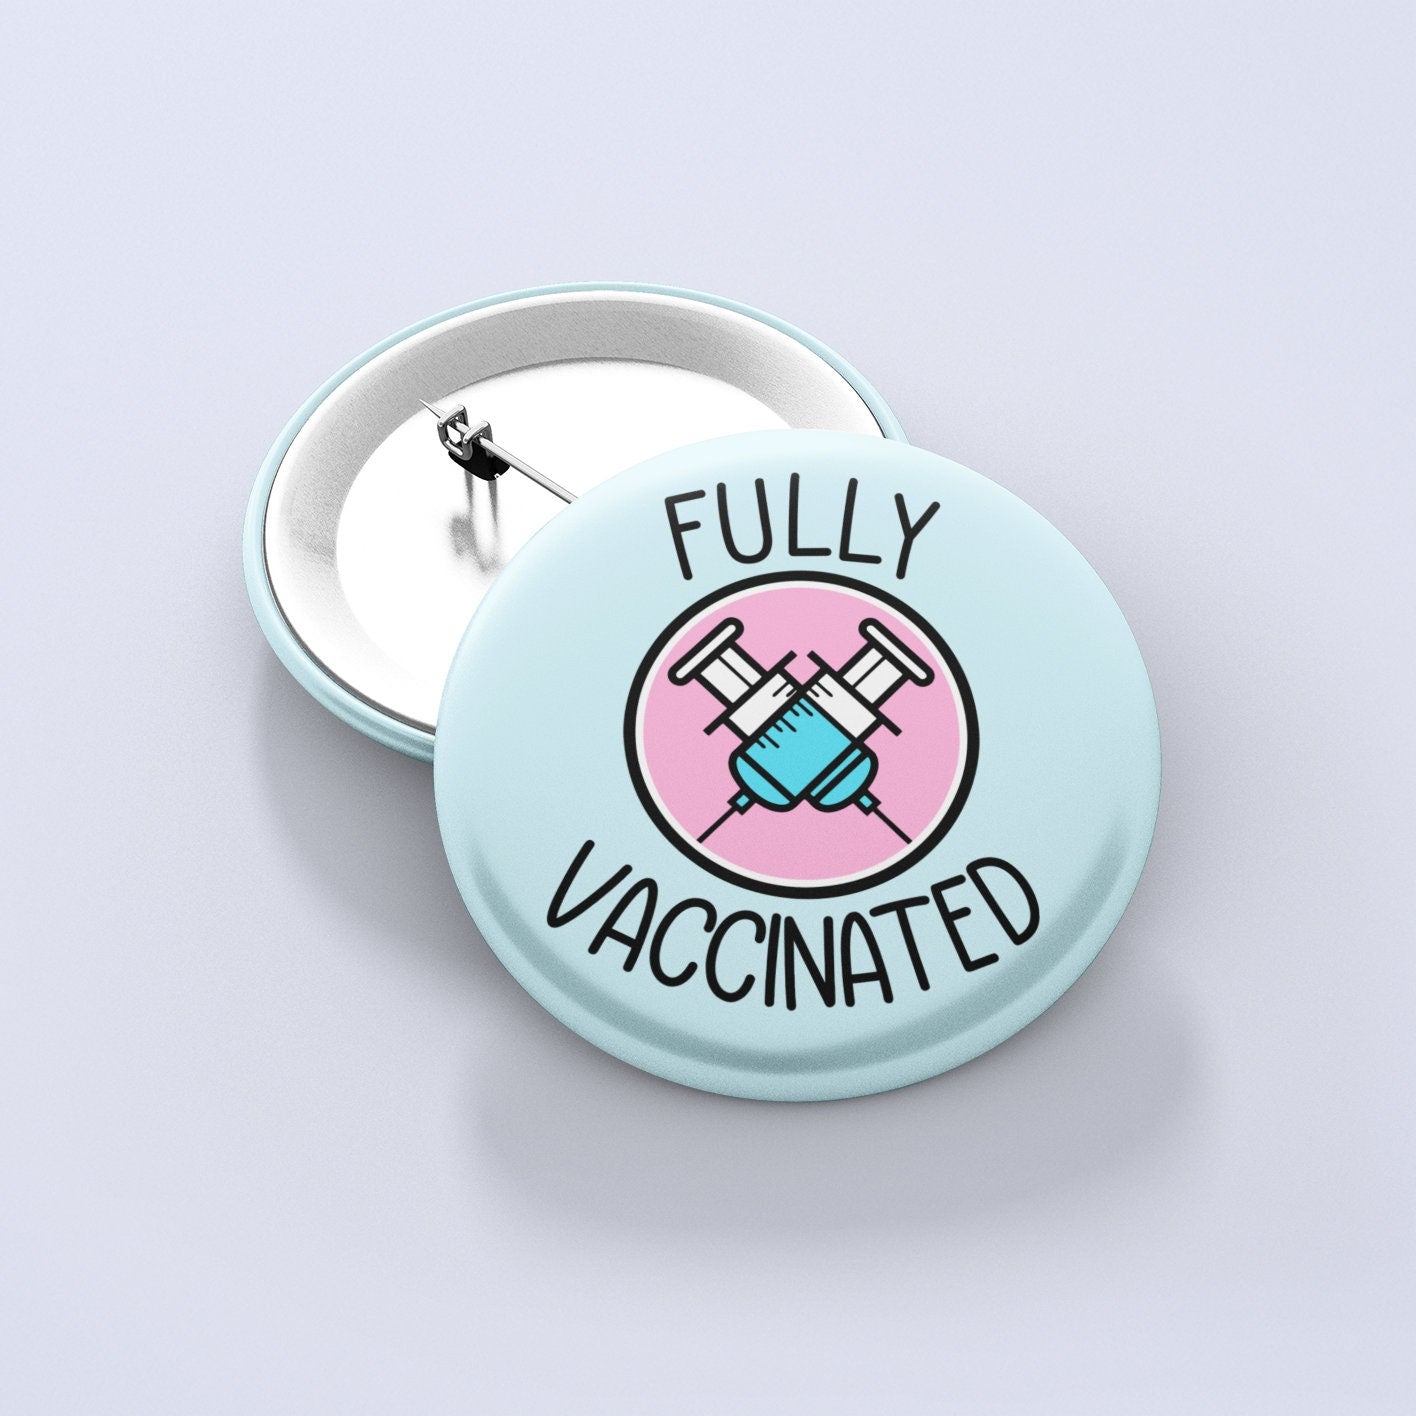 Vaccinated Covid Badge Pin | I've been vaccinated - NHS - Covid Vaccine - Pro vaccine